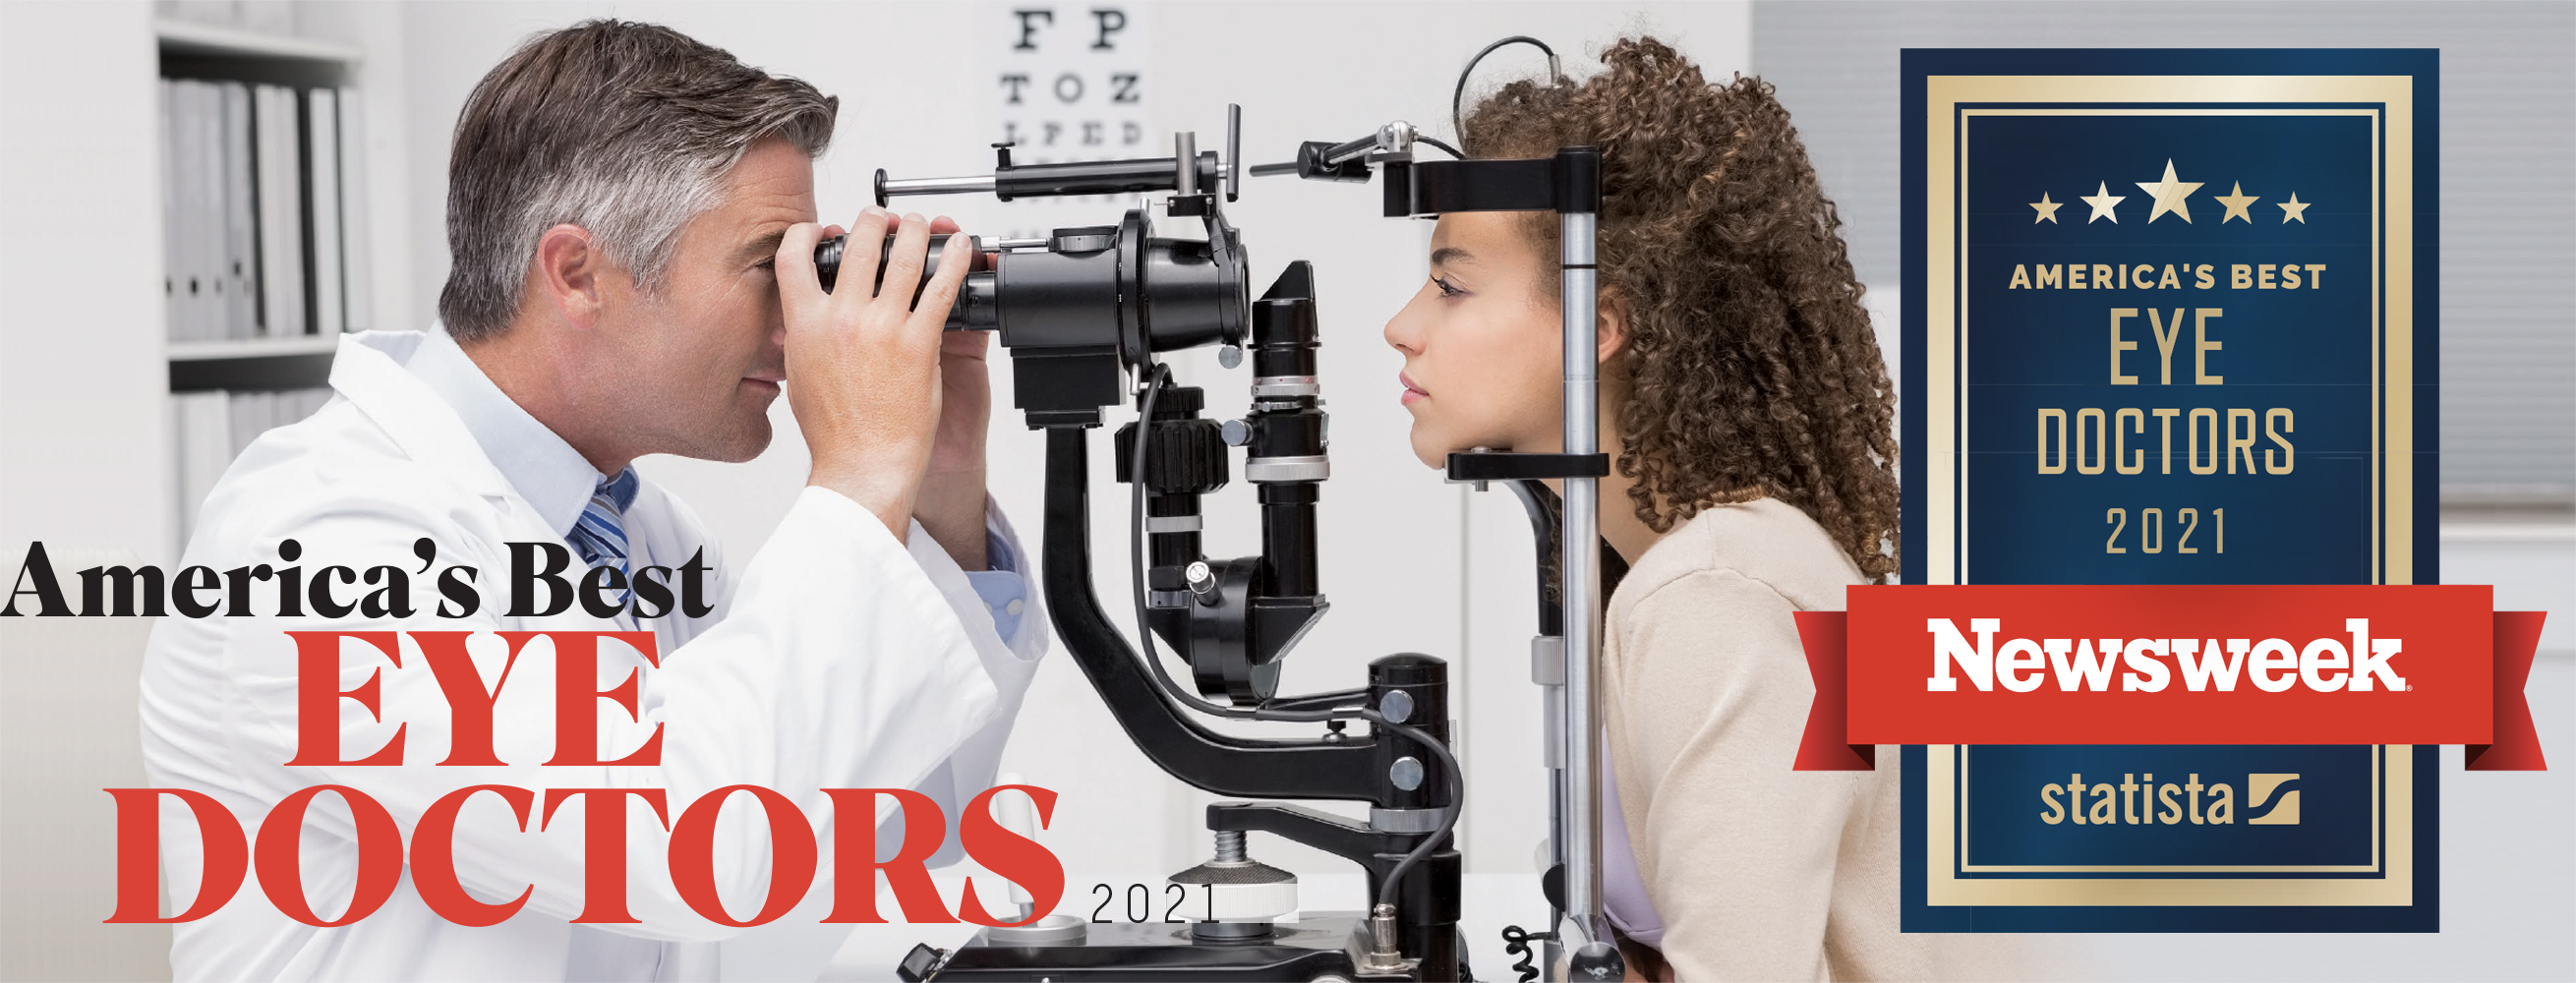 Americas Best Eye Doctors 2021 Ophthalmologists